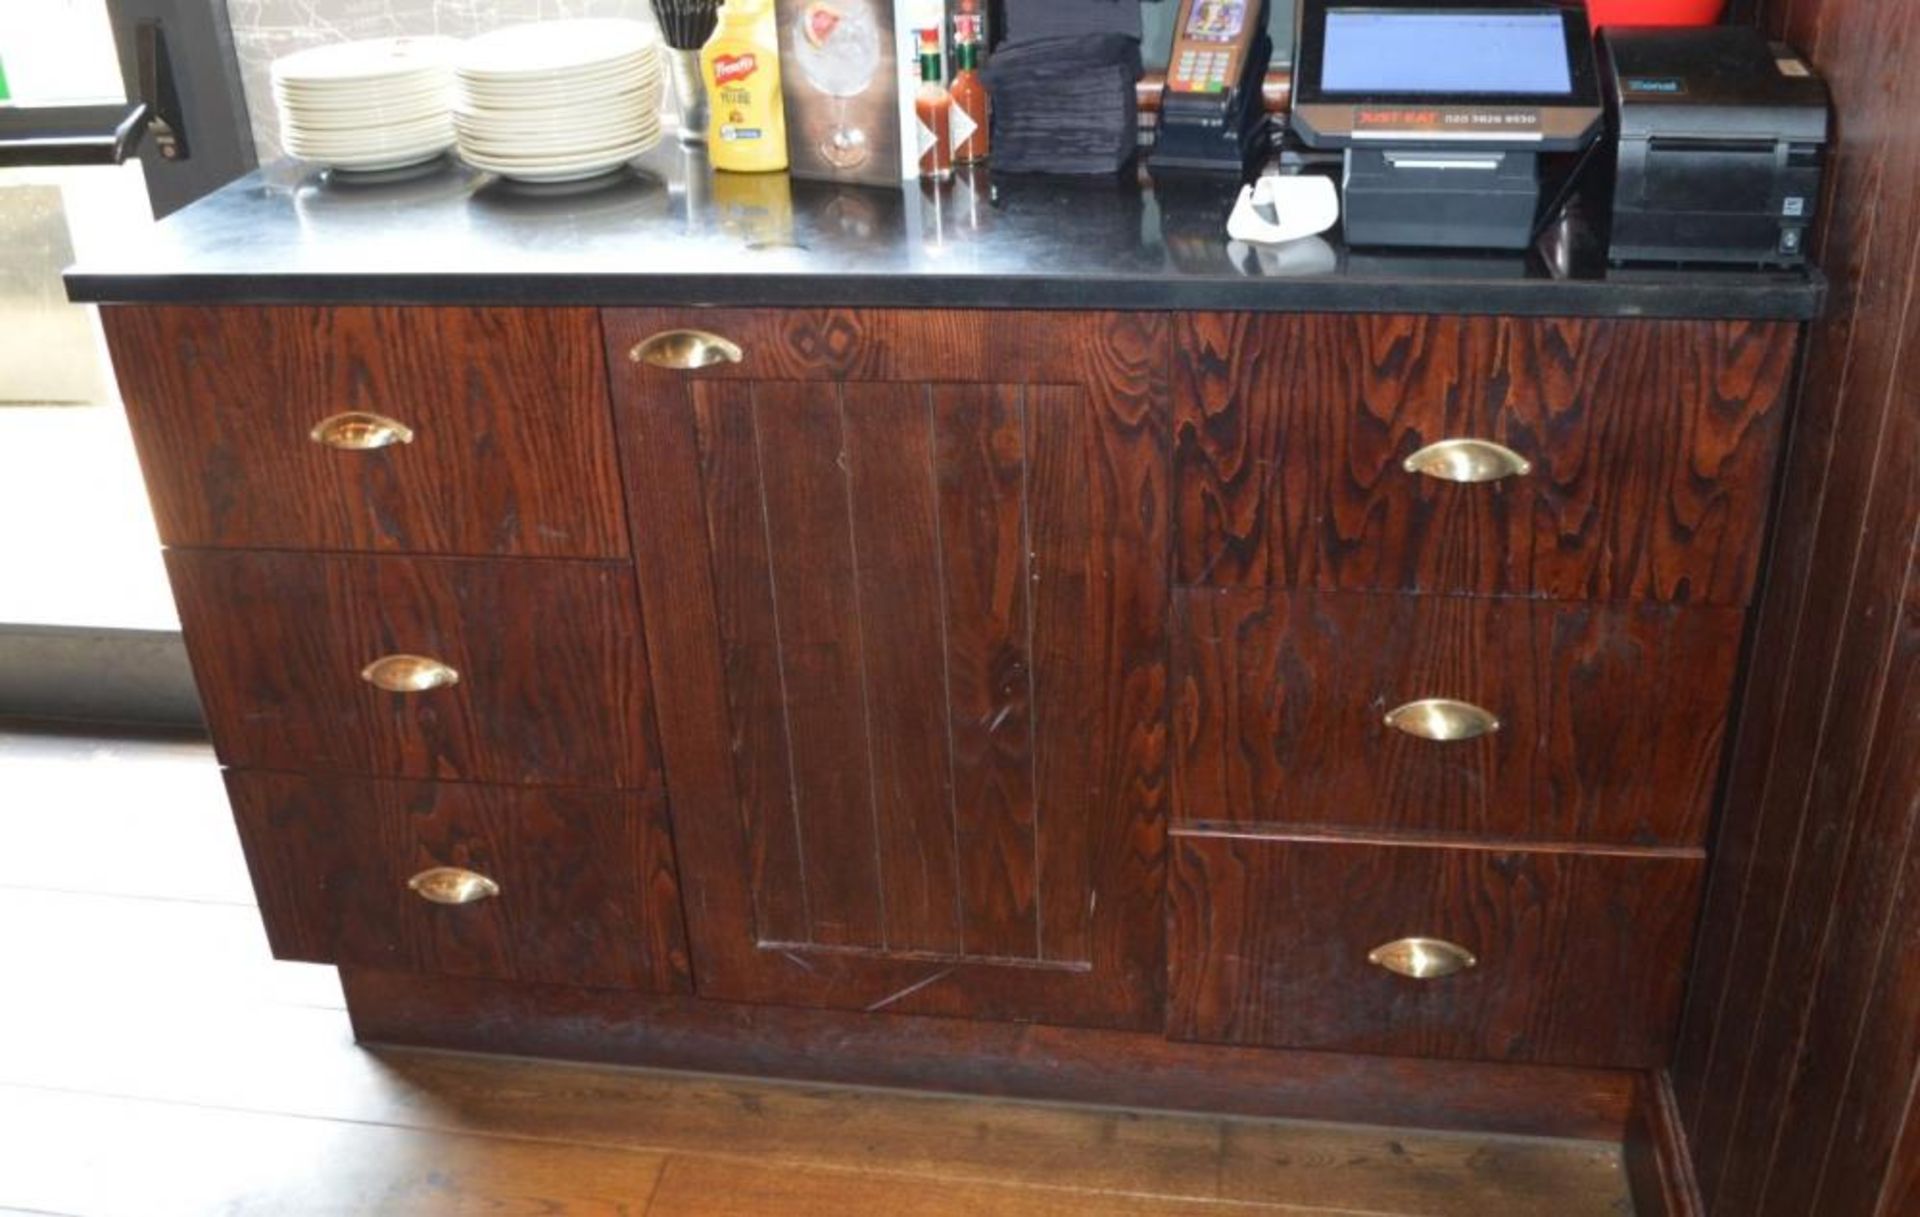 1 x Waitress Server Counter With Dark Wood Finish, Brass Hardware and Stone Top - H96 x W150 x D52 - Image 3 of 4